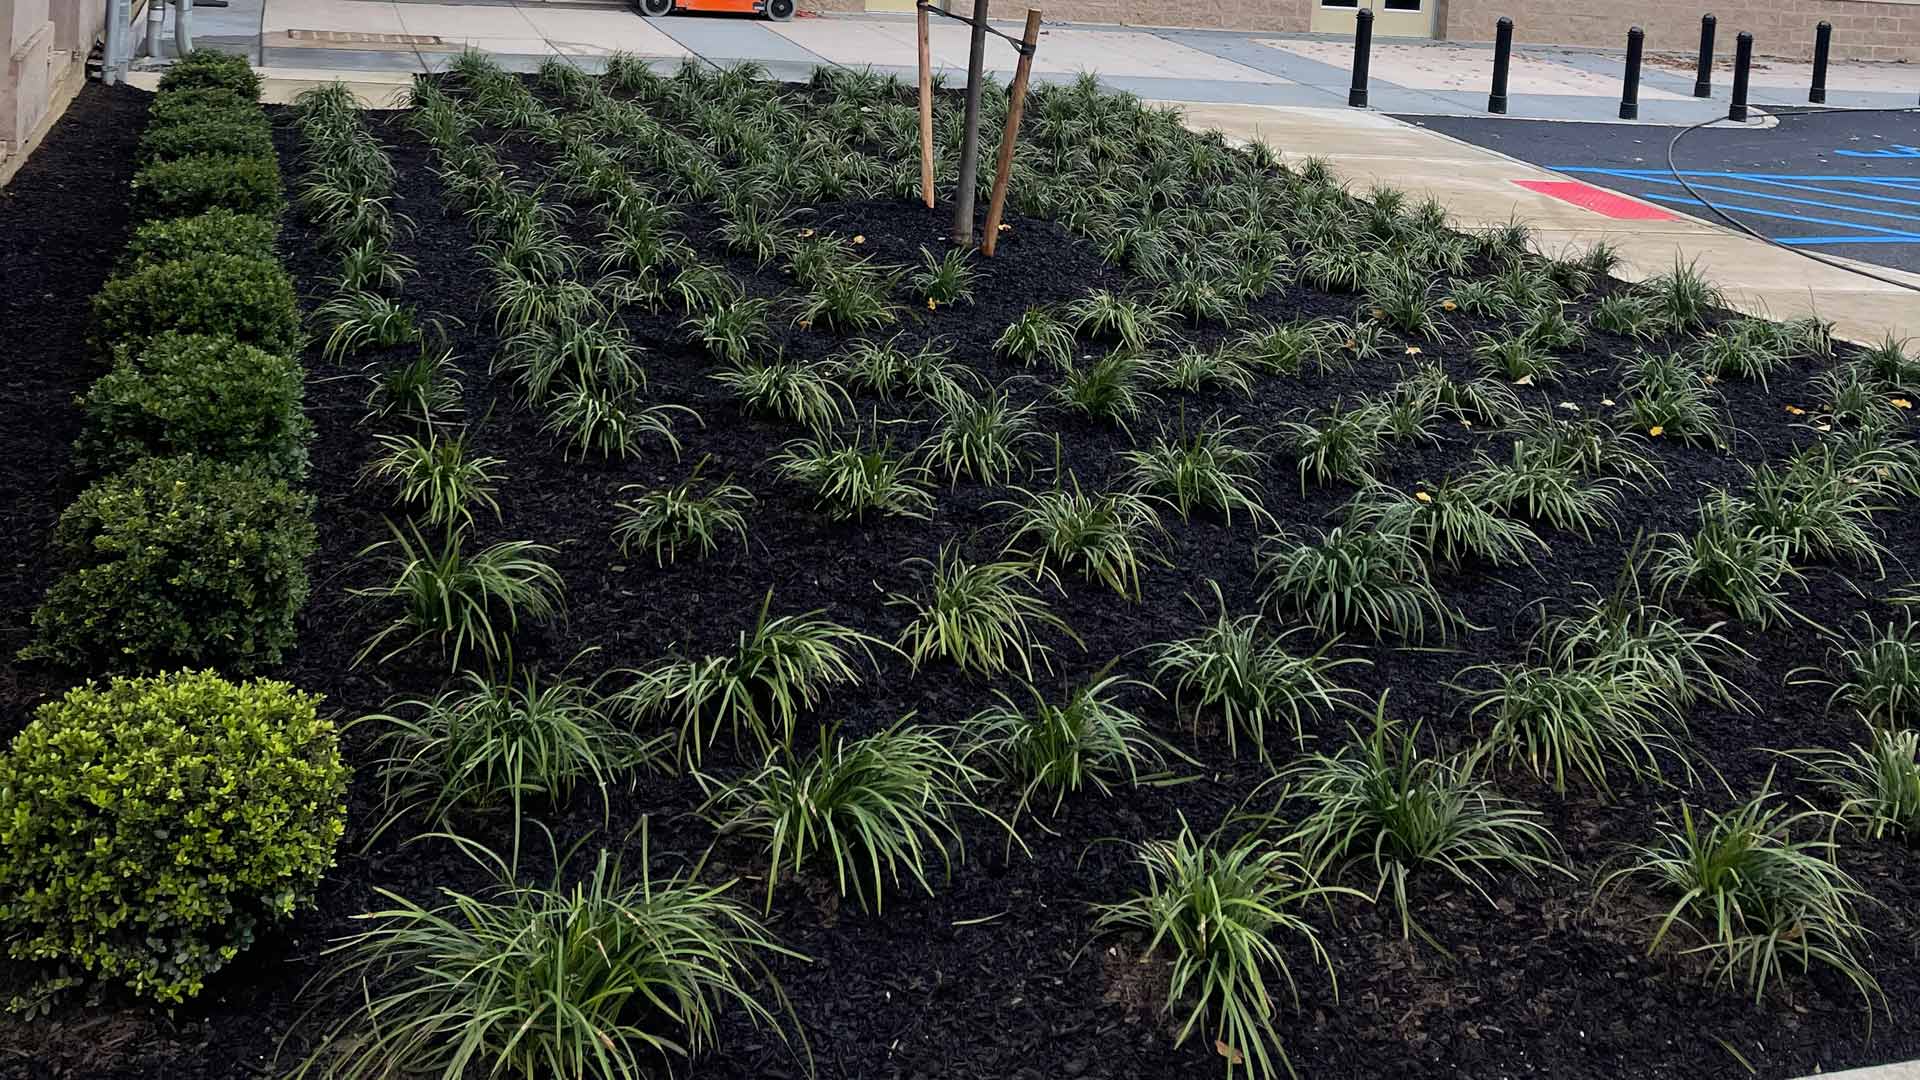 Mulch added to landscape bed in Edgewater, NJ.